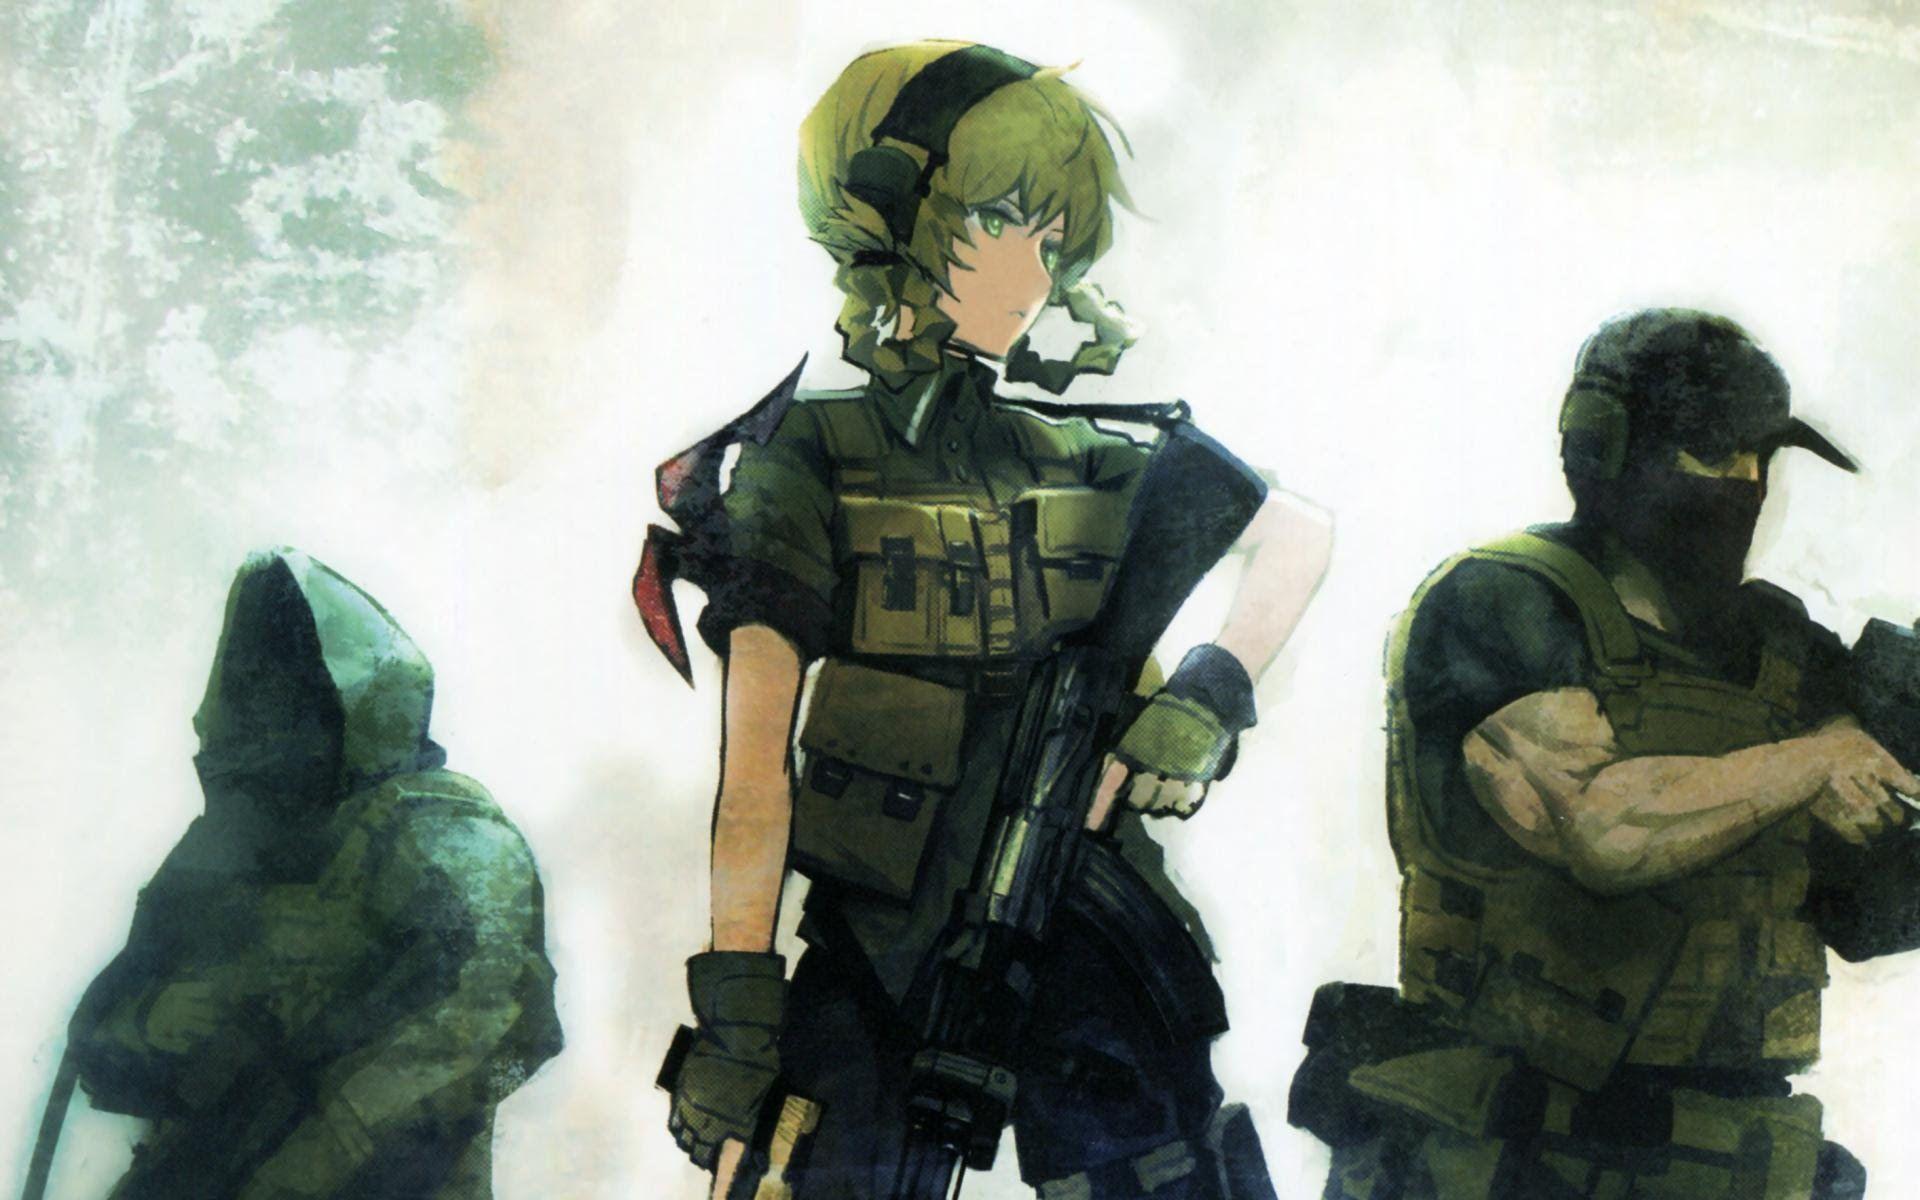 Anime Soldier Wallpapers - Wallpaper Cave